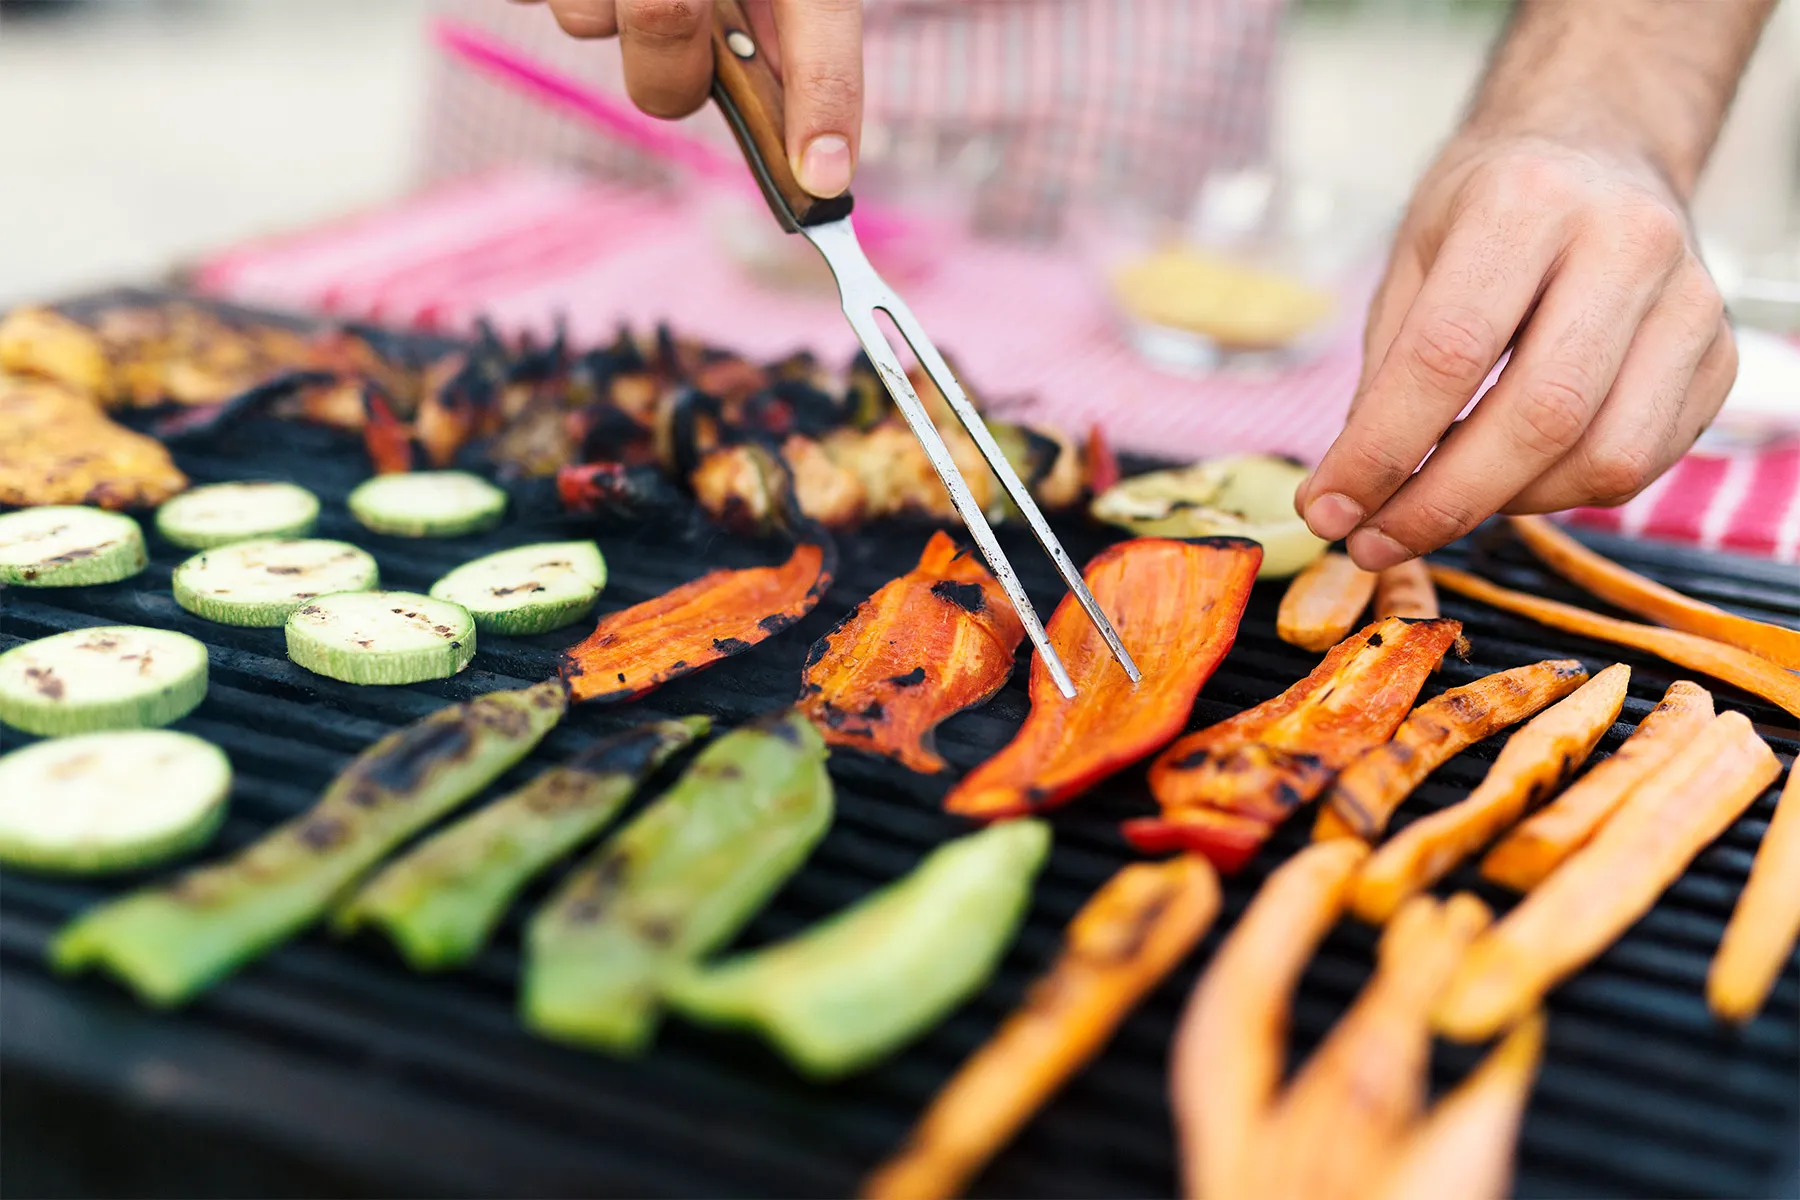 Toxins From Grilling, Smoking & Car Exhaust Could Raise Odds for RA